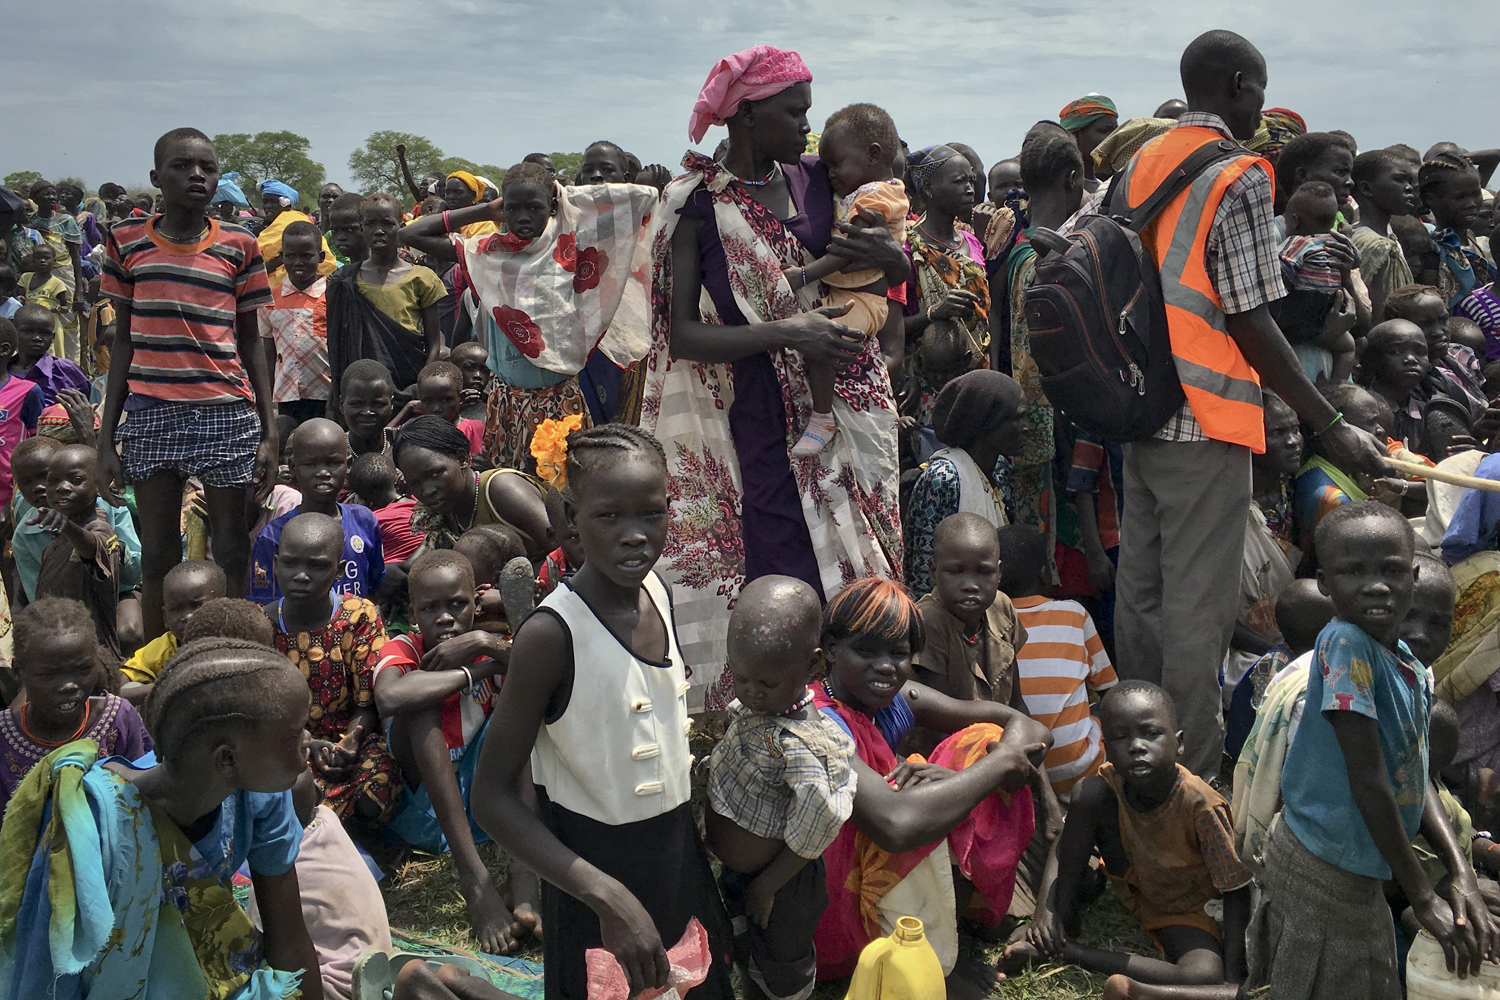 Men, women and children line up to be registered with the World Food Programme in South Sudan. South Sudan no longer has areas in famine, but almost 2 million people are on the brink of starvation. (Sam Mednick/AP)